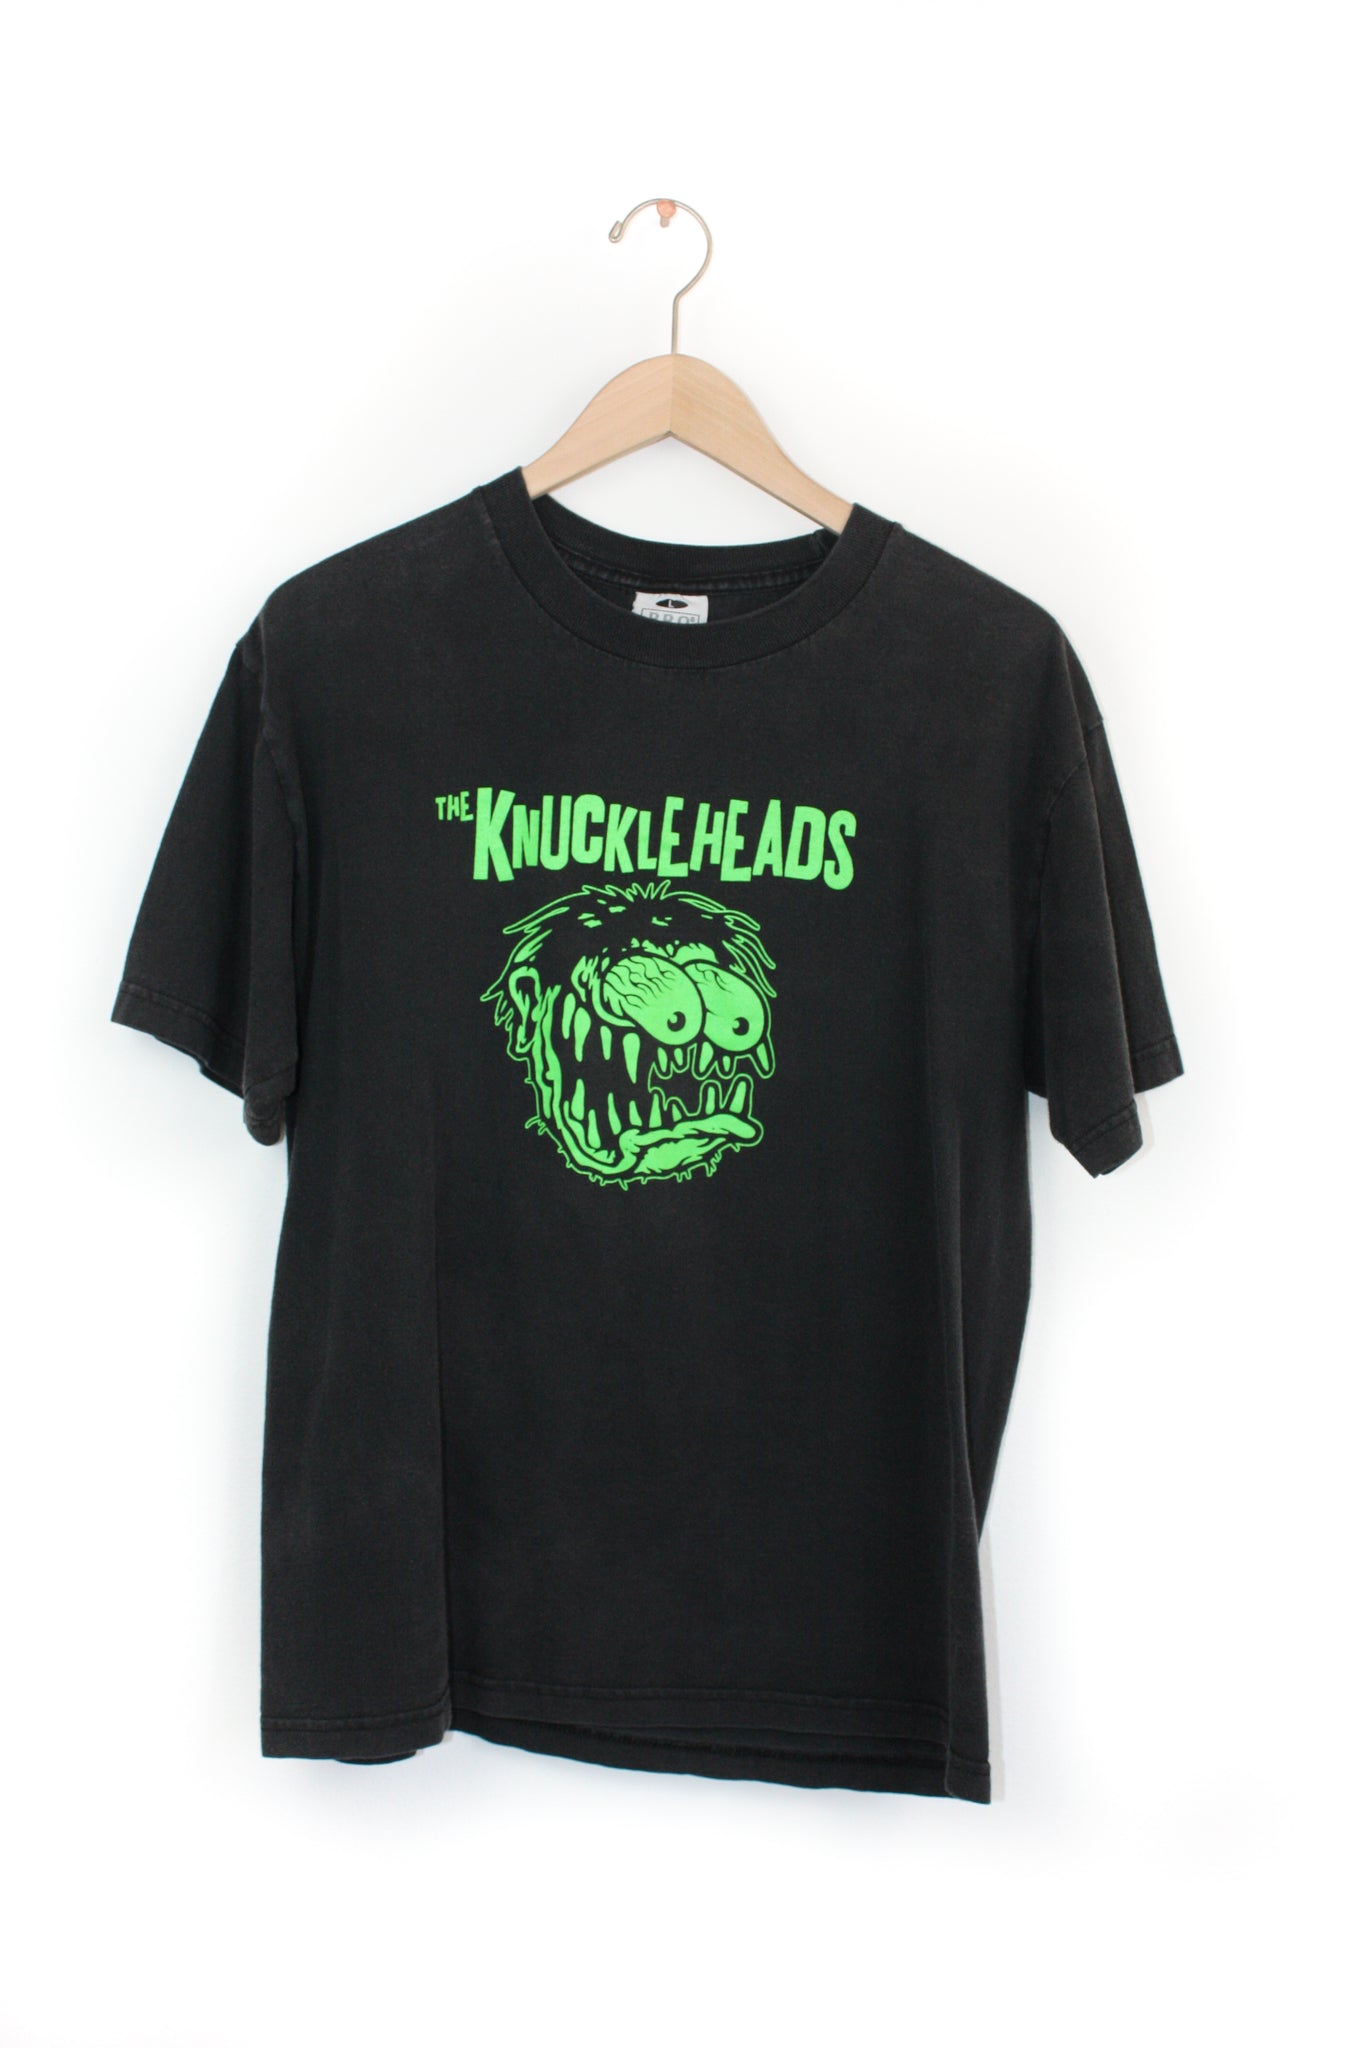 THE KNUCKLEHEADS PUNK TEE